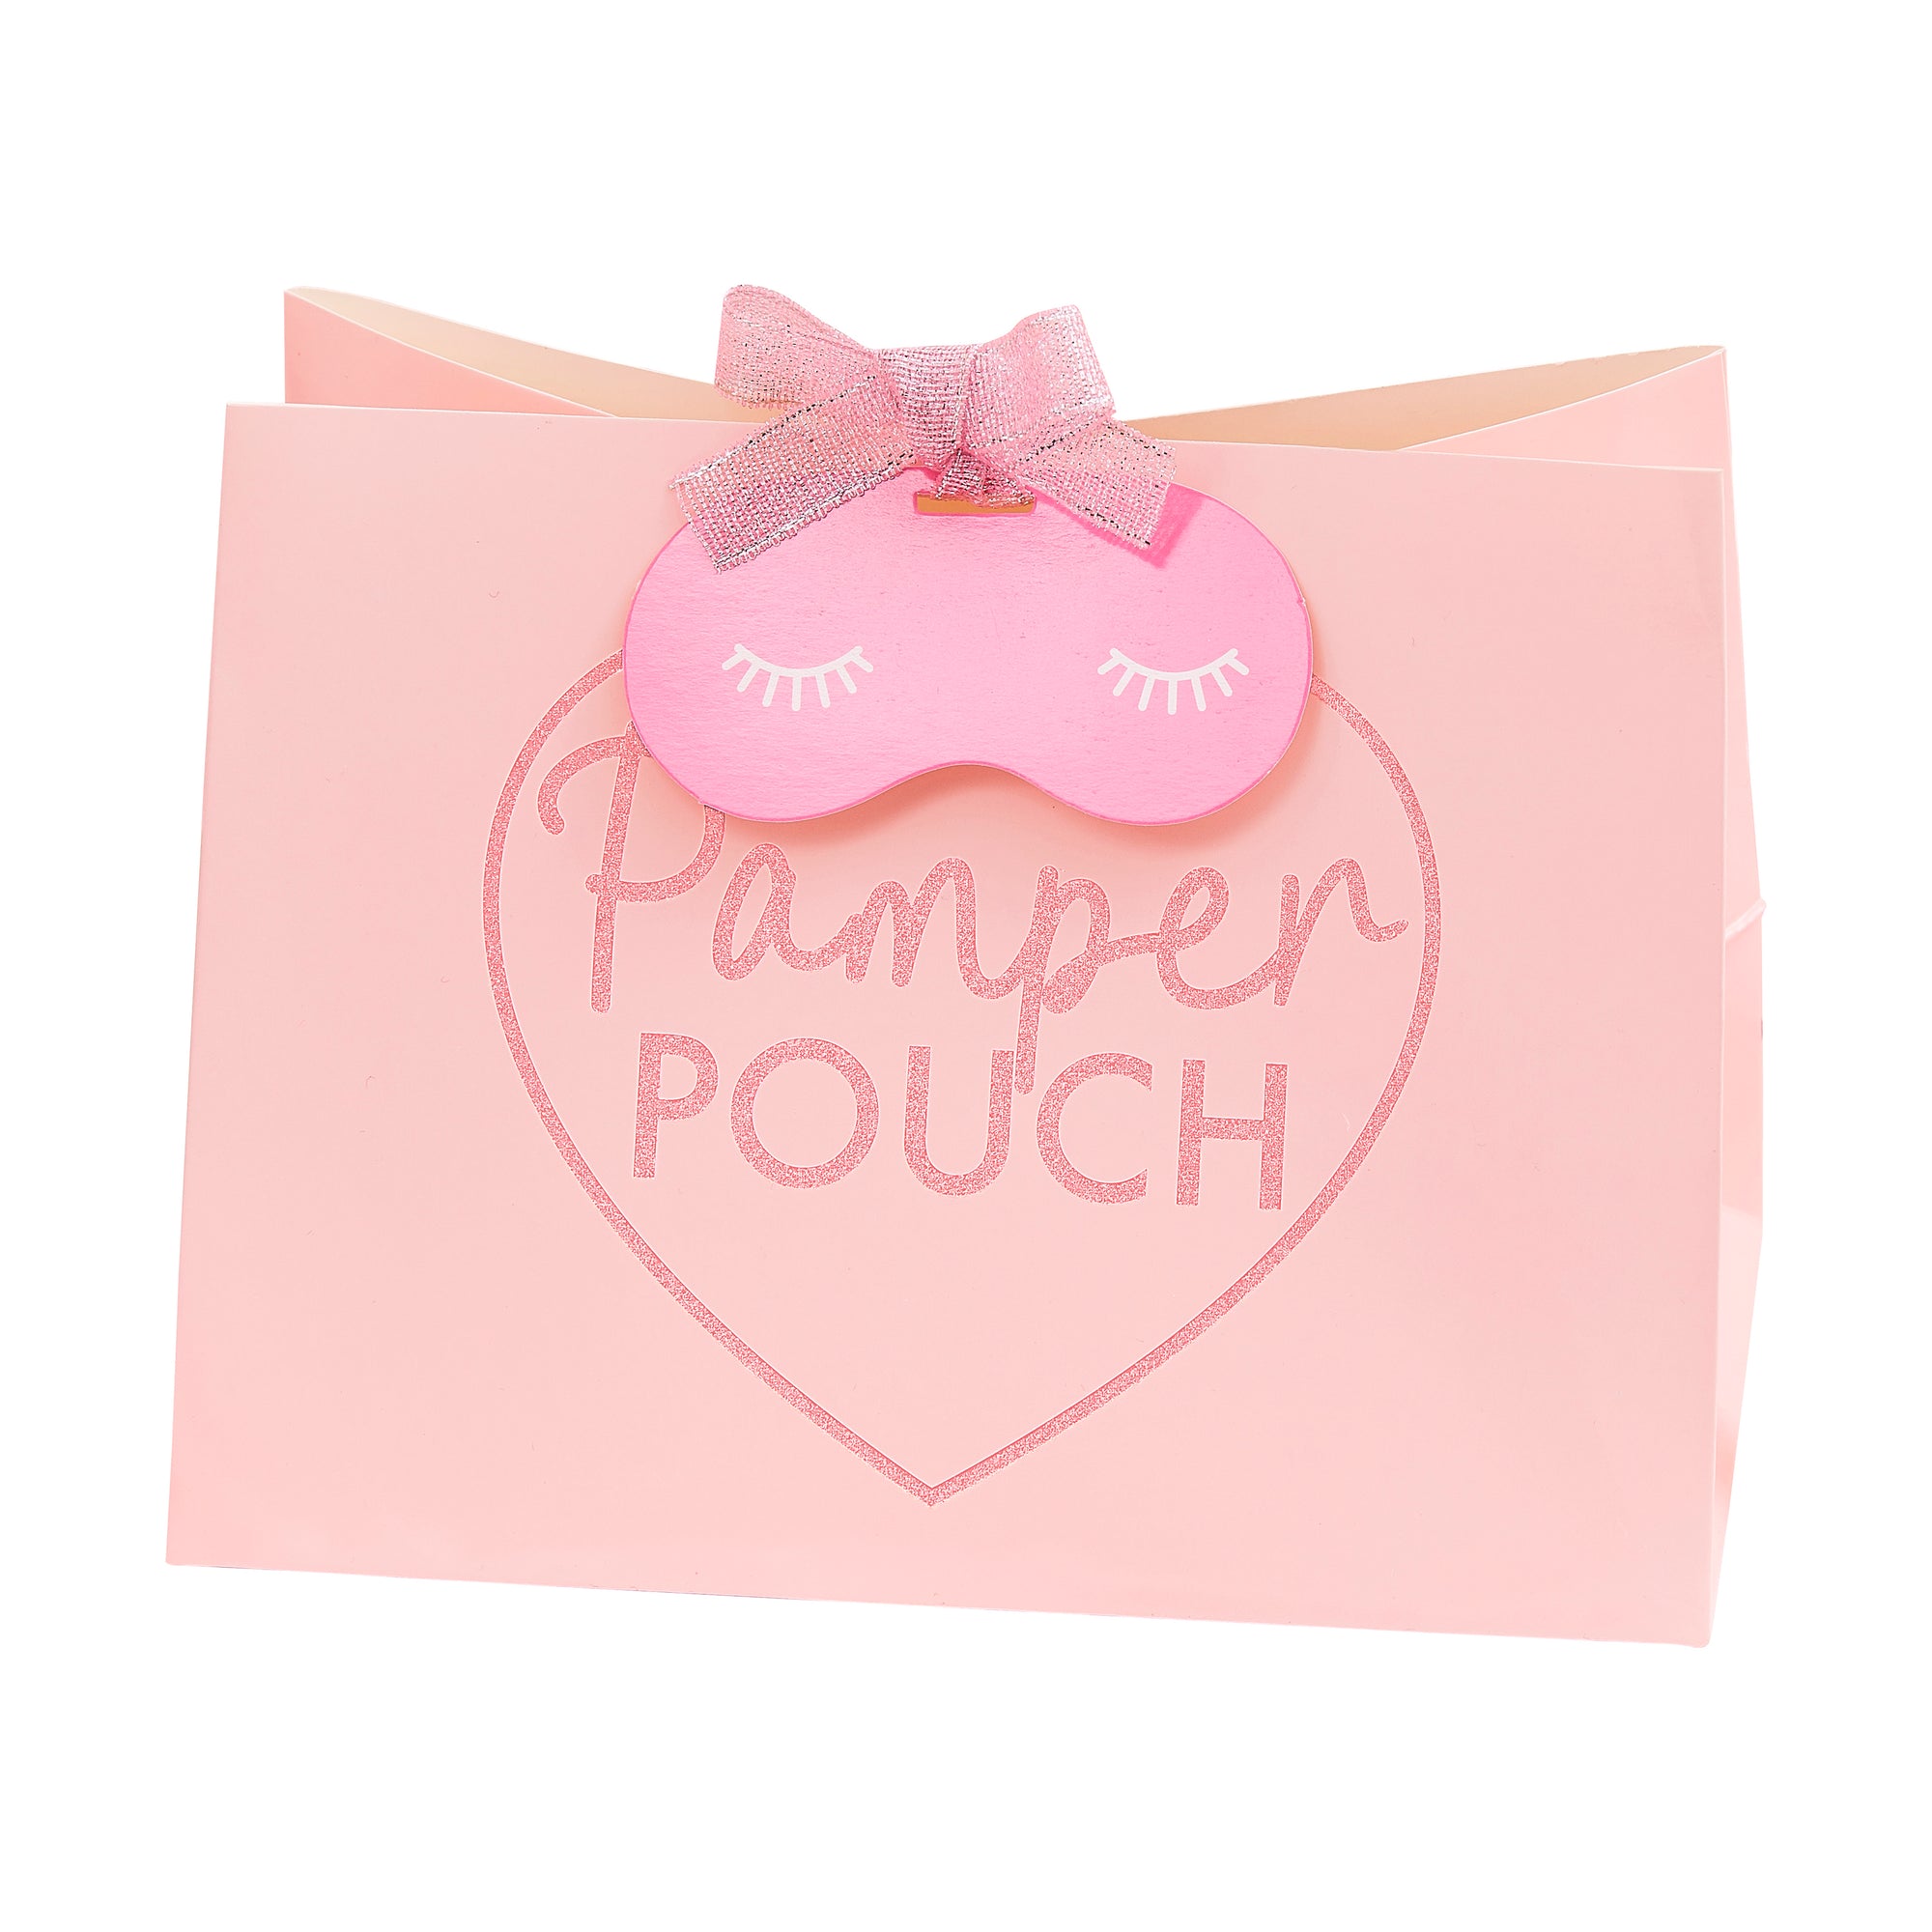 Pink pamper pouch party bag with cute heart mofif and eye mask name tag.